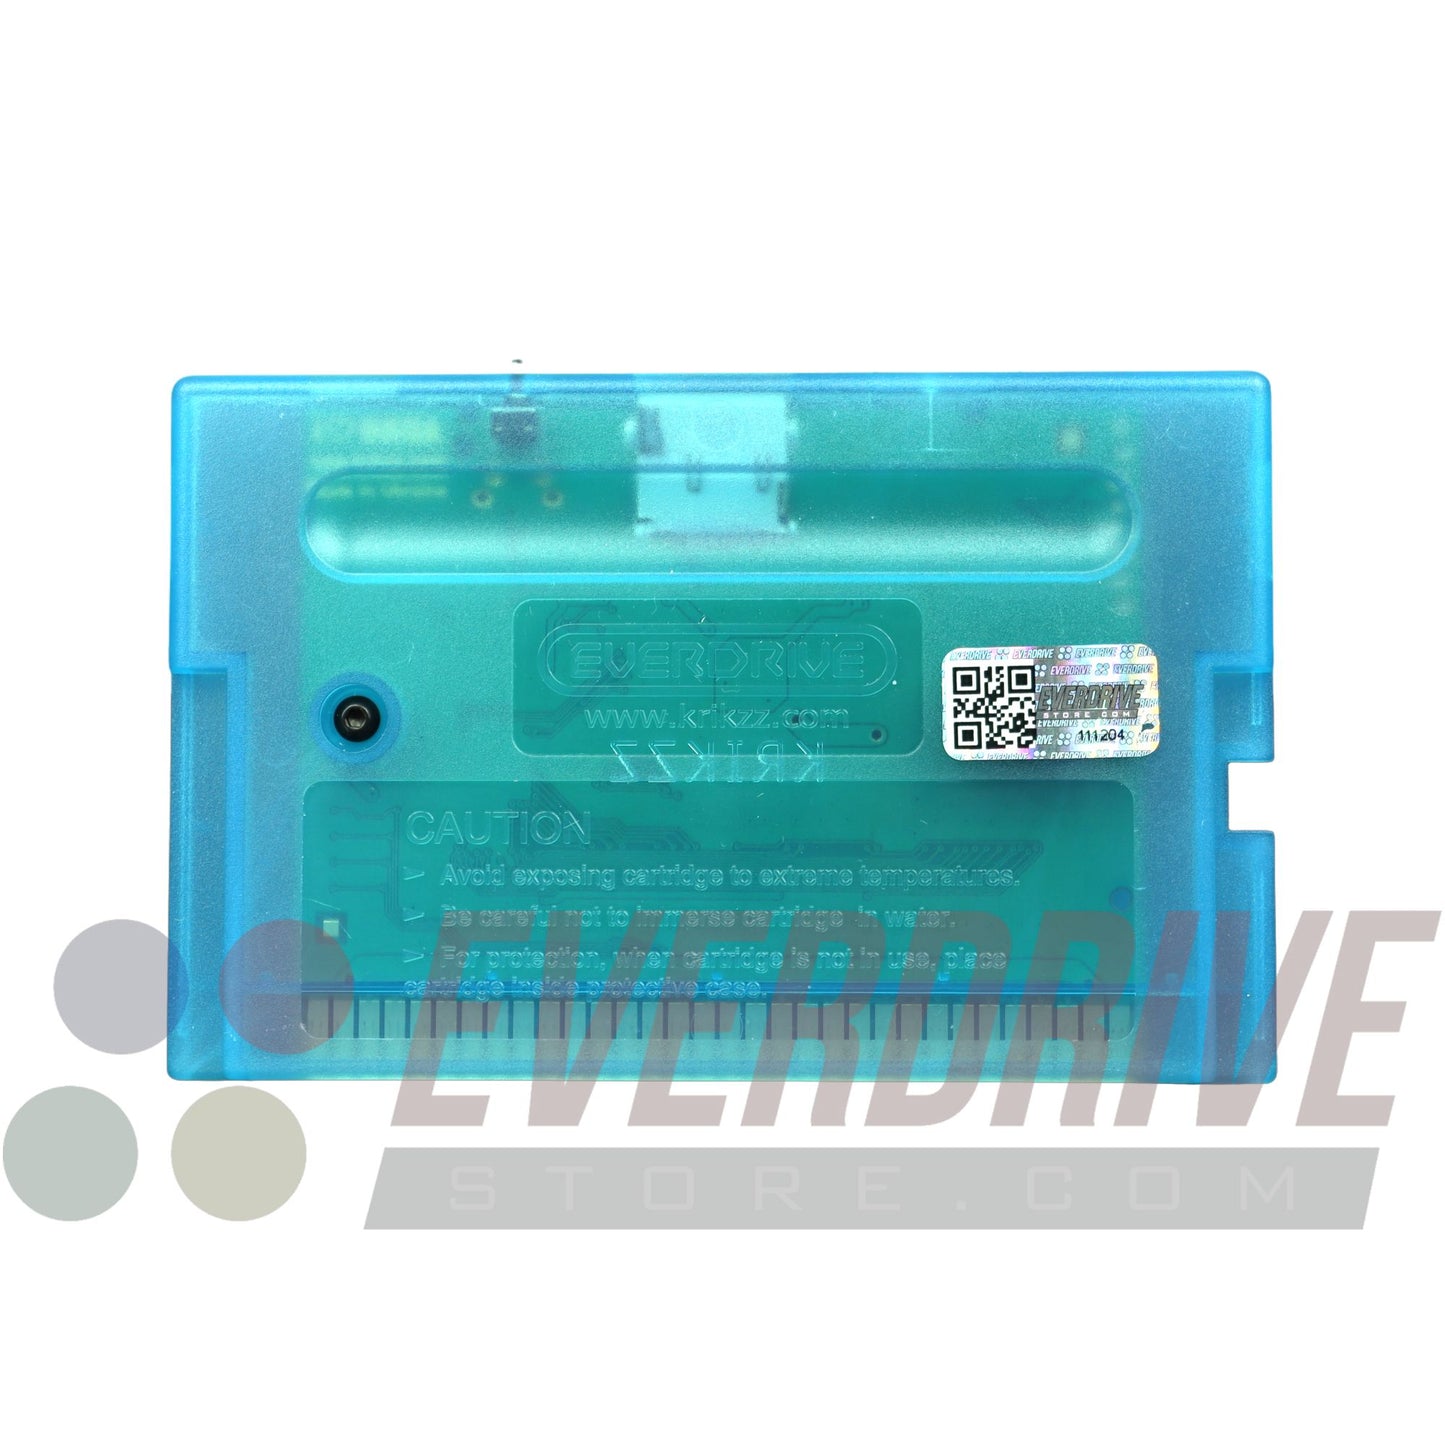 Mega Everdrive X5 - Frosted Turquoise